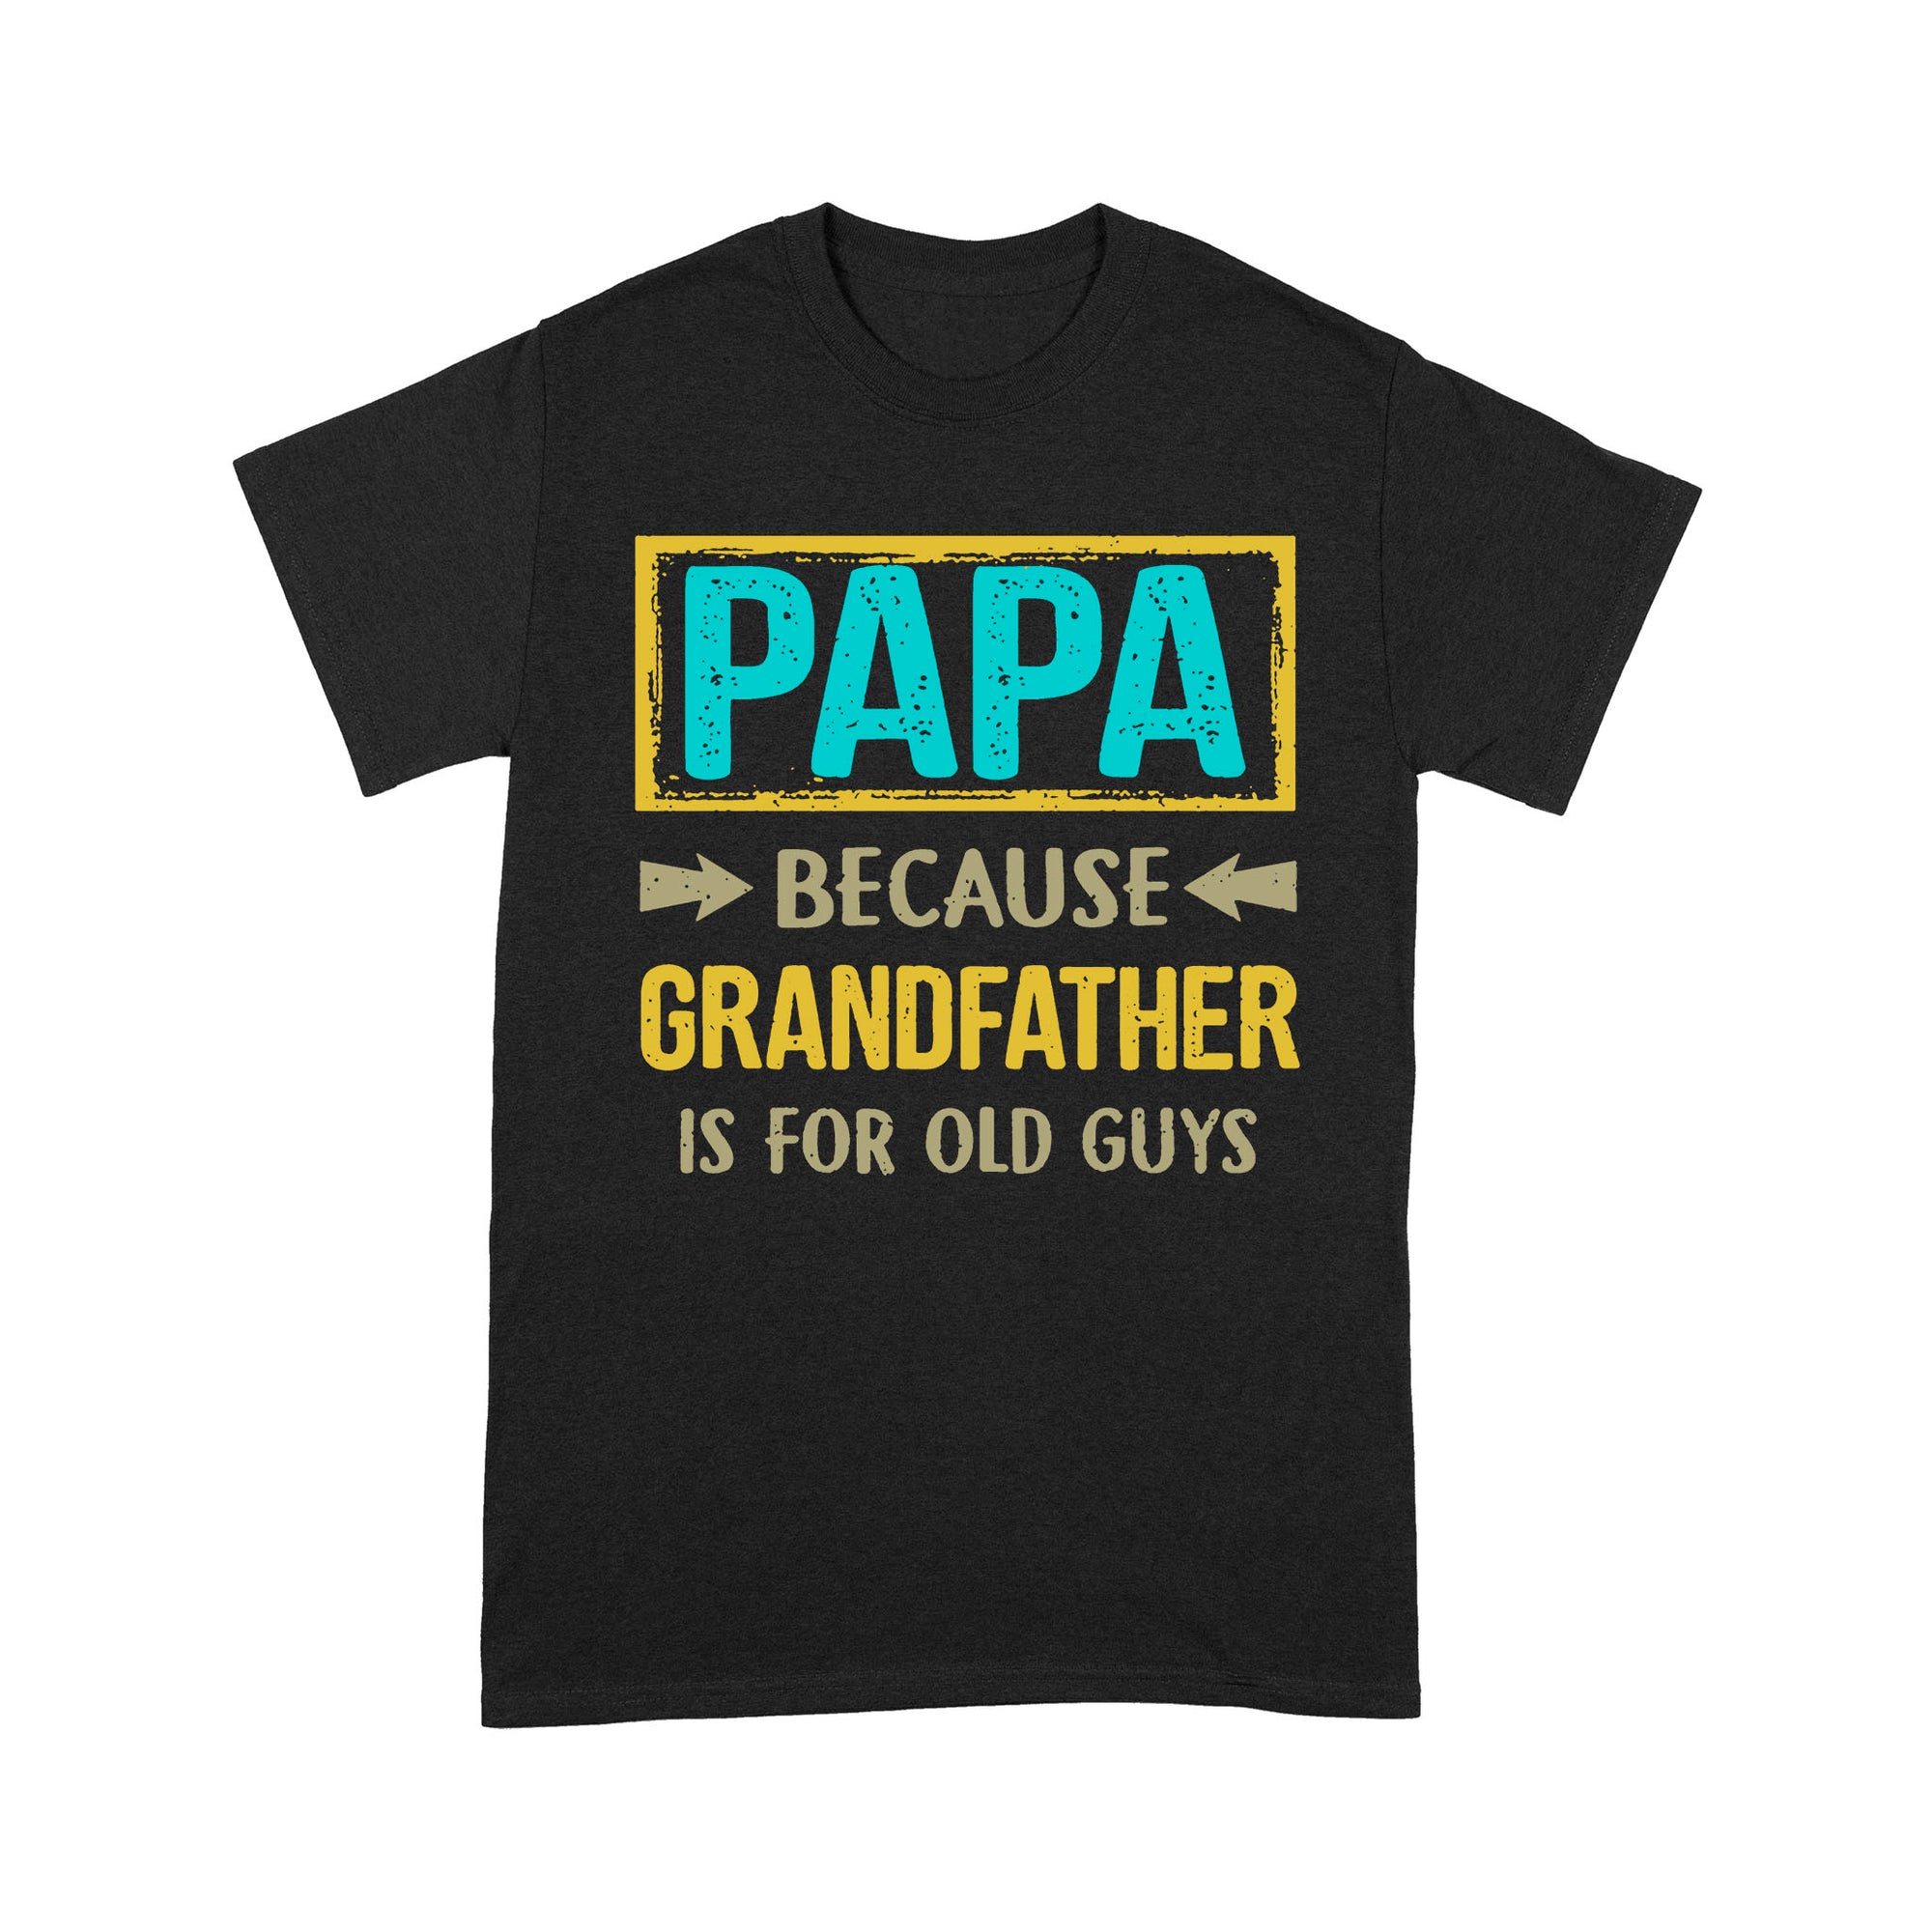 Papa Because Grandfather Is For Old Guys, Classic Vintage - Standard T-shirt